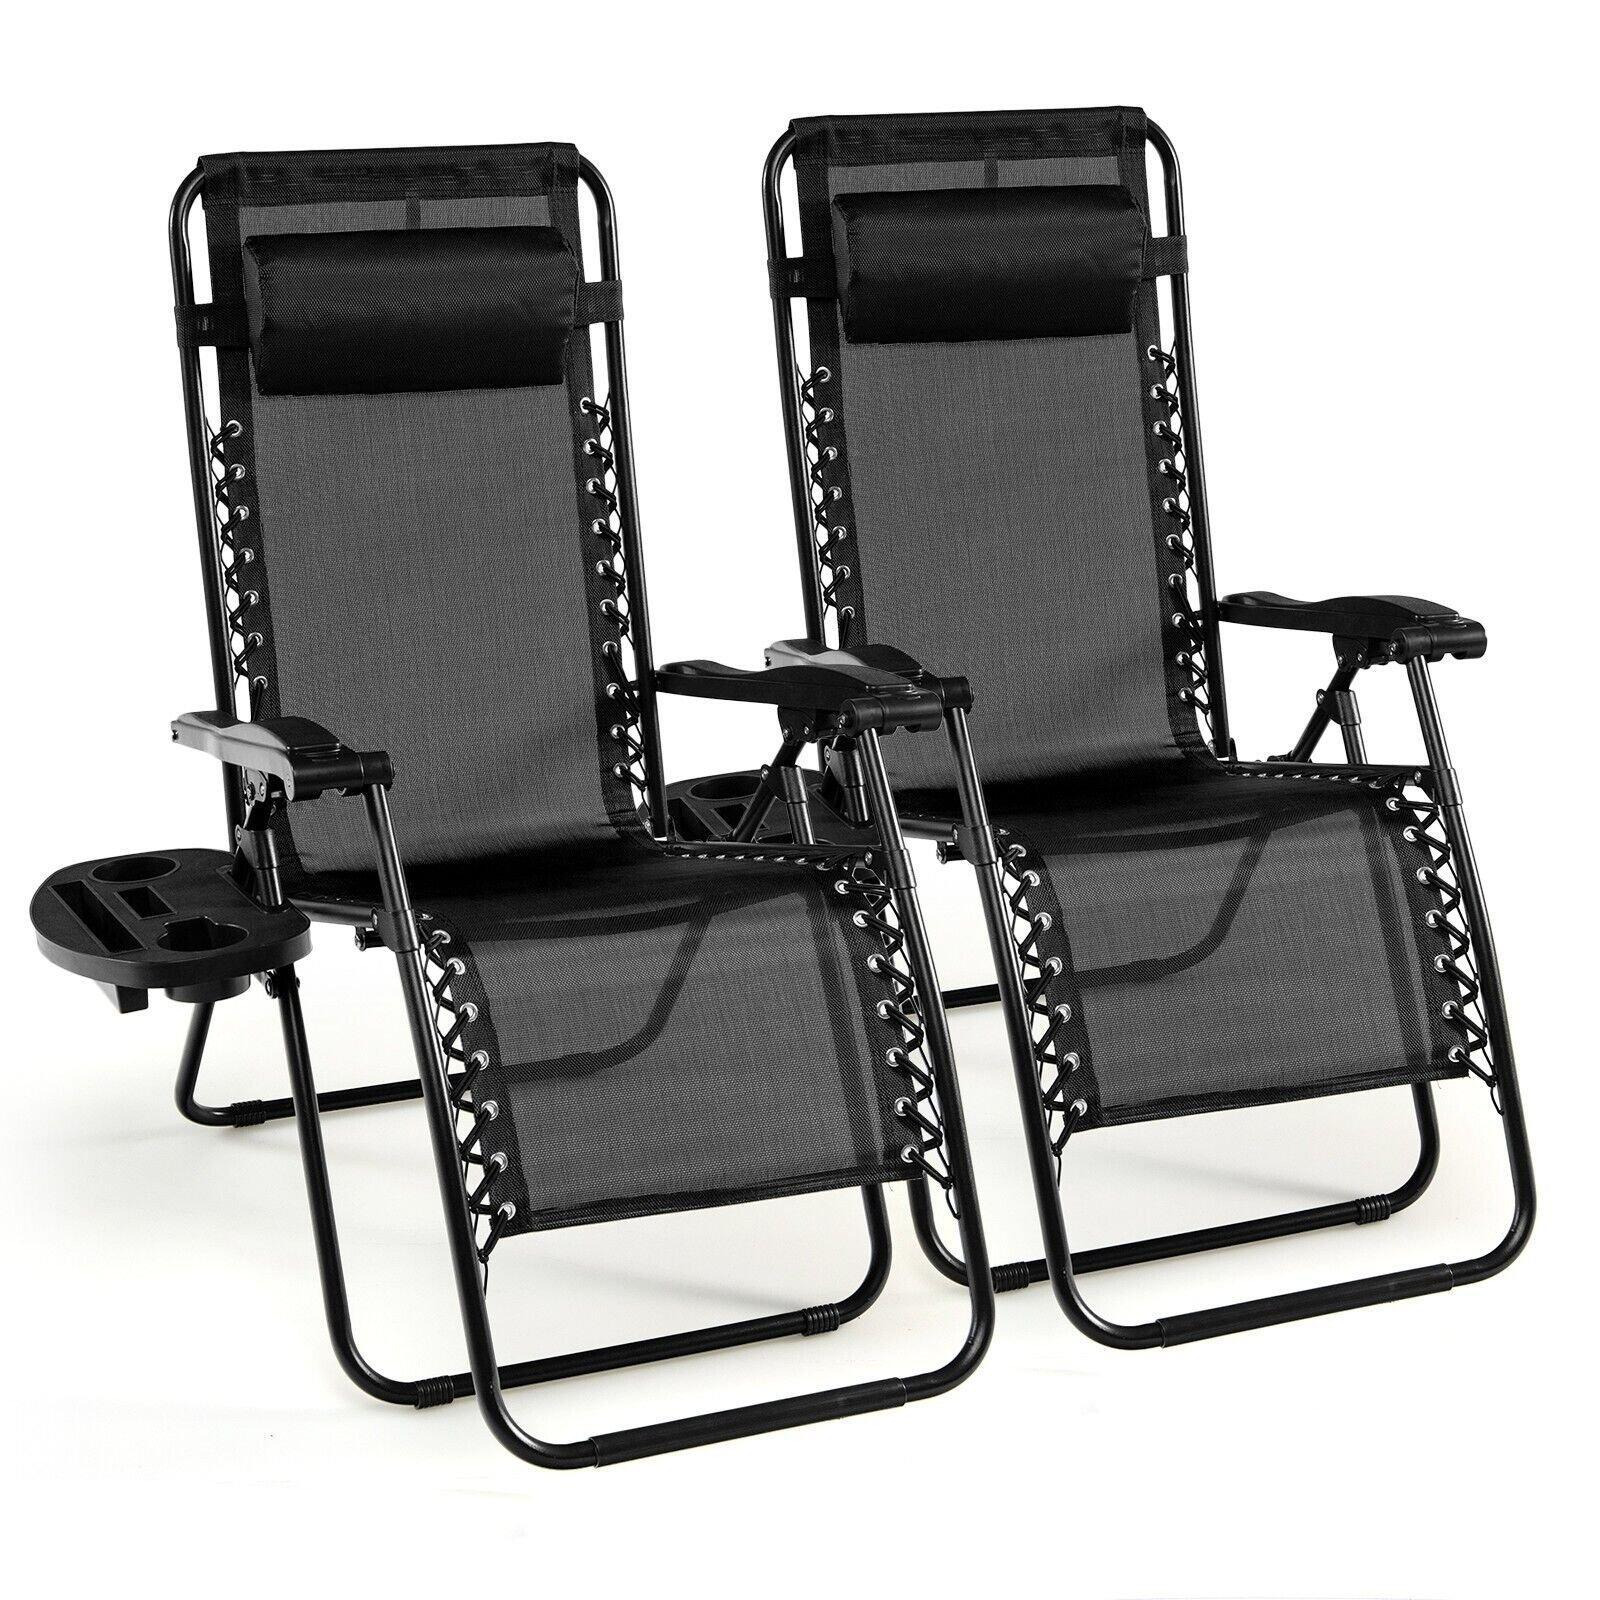 Set of 2 Folding Zero Gravity Chairs Outdoor Patio Recliners Removable Headrests - image 1